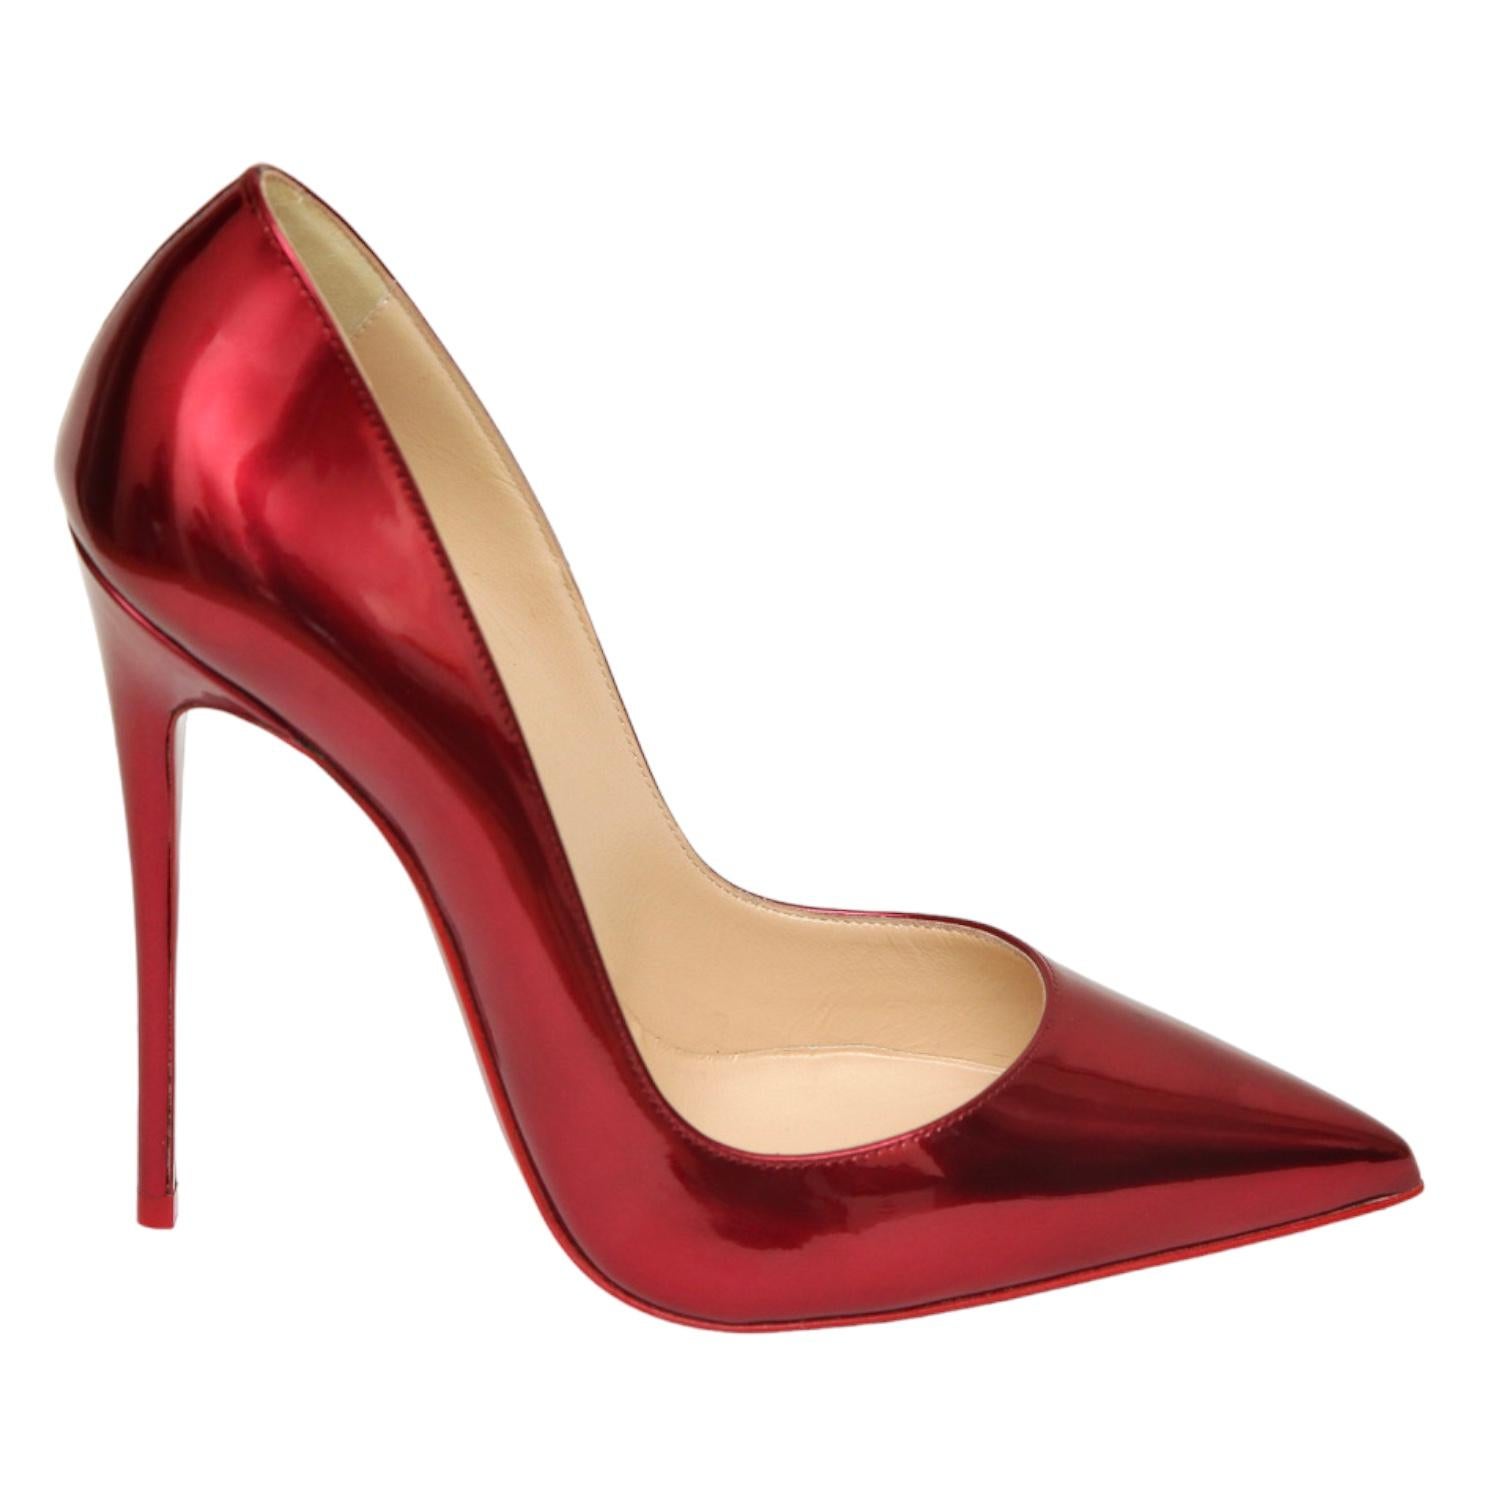 CHRISTIAN LOUBOUTIN SO KATE 120mm RED GLOSSY PATENT LEATHER PUMPS

Design:
- Red glossy patent leather uppers.
- Self-covered heel.
- Leather lining.
- Signature red leather sole.
- Comes with Christian Louboutin dust bag.

Size: 38

Measurements